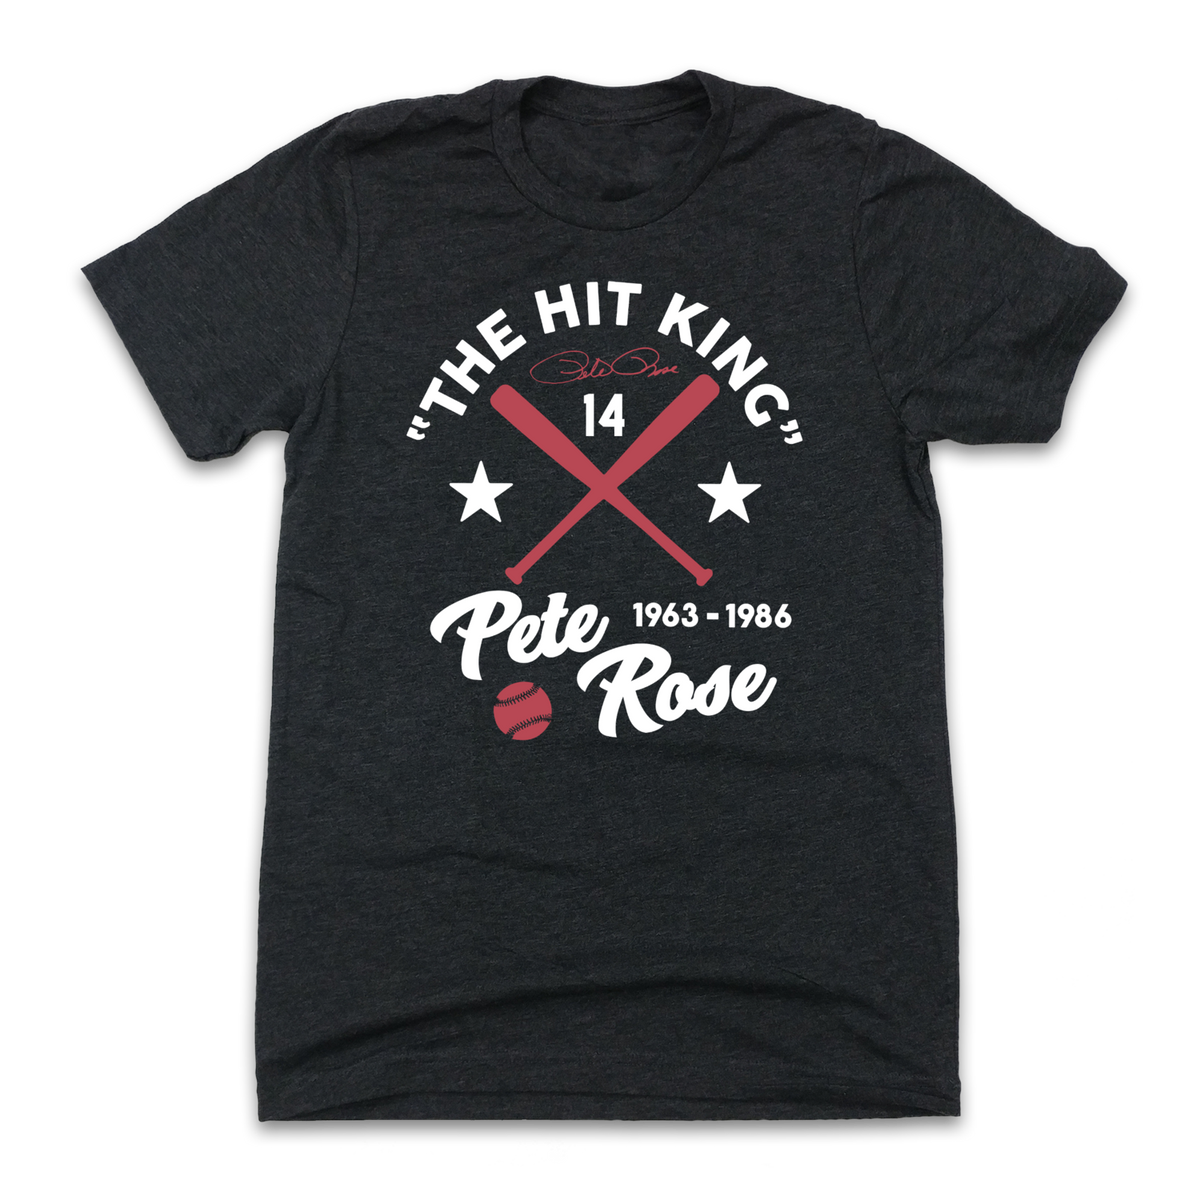 "The Hit King" Pete Rose